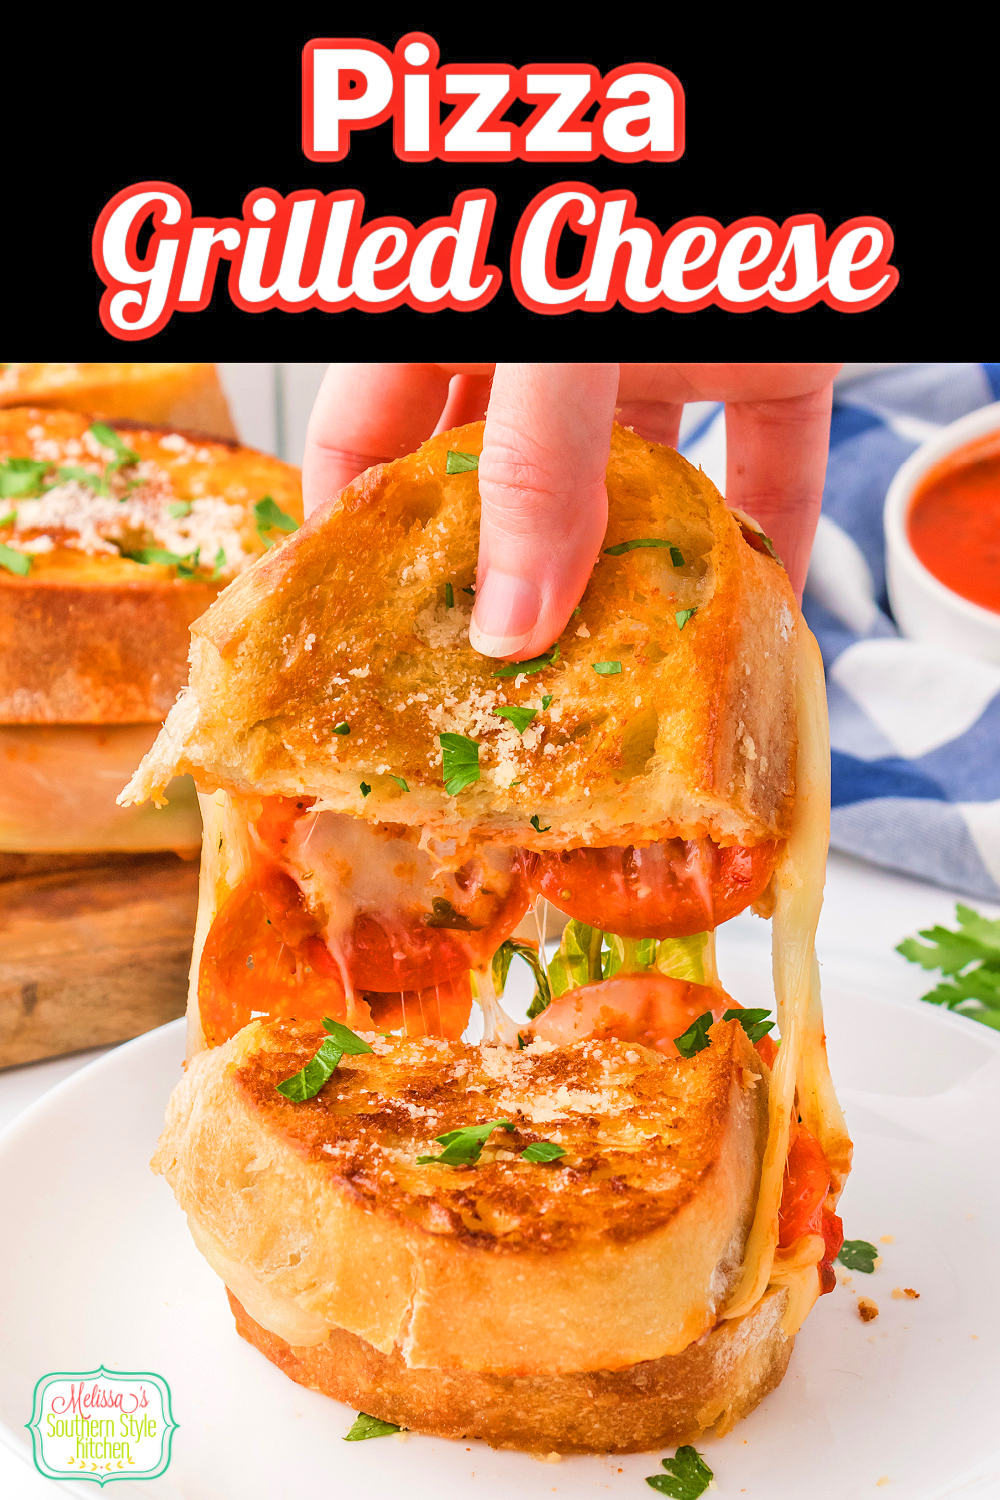 This Pizza Grilled Cheese recipe features an unexpected layer of romaine that adds crunch and texture to complete the flavor profile #pizzarecipes #pepperonipizza #pizzagrilledcheese #grilledcheese #grilledcheeserecipe #easygrilledcheeserecipes #pizzagrilled cheese